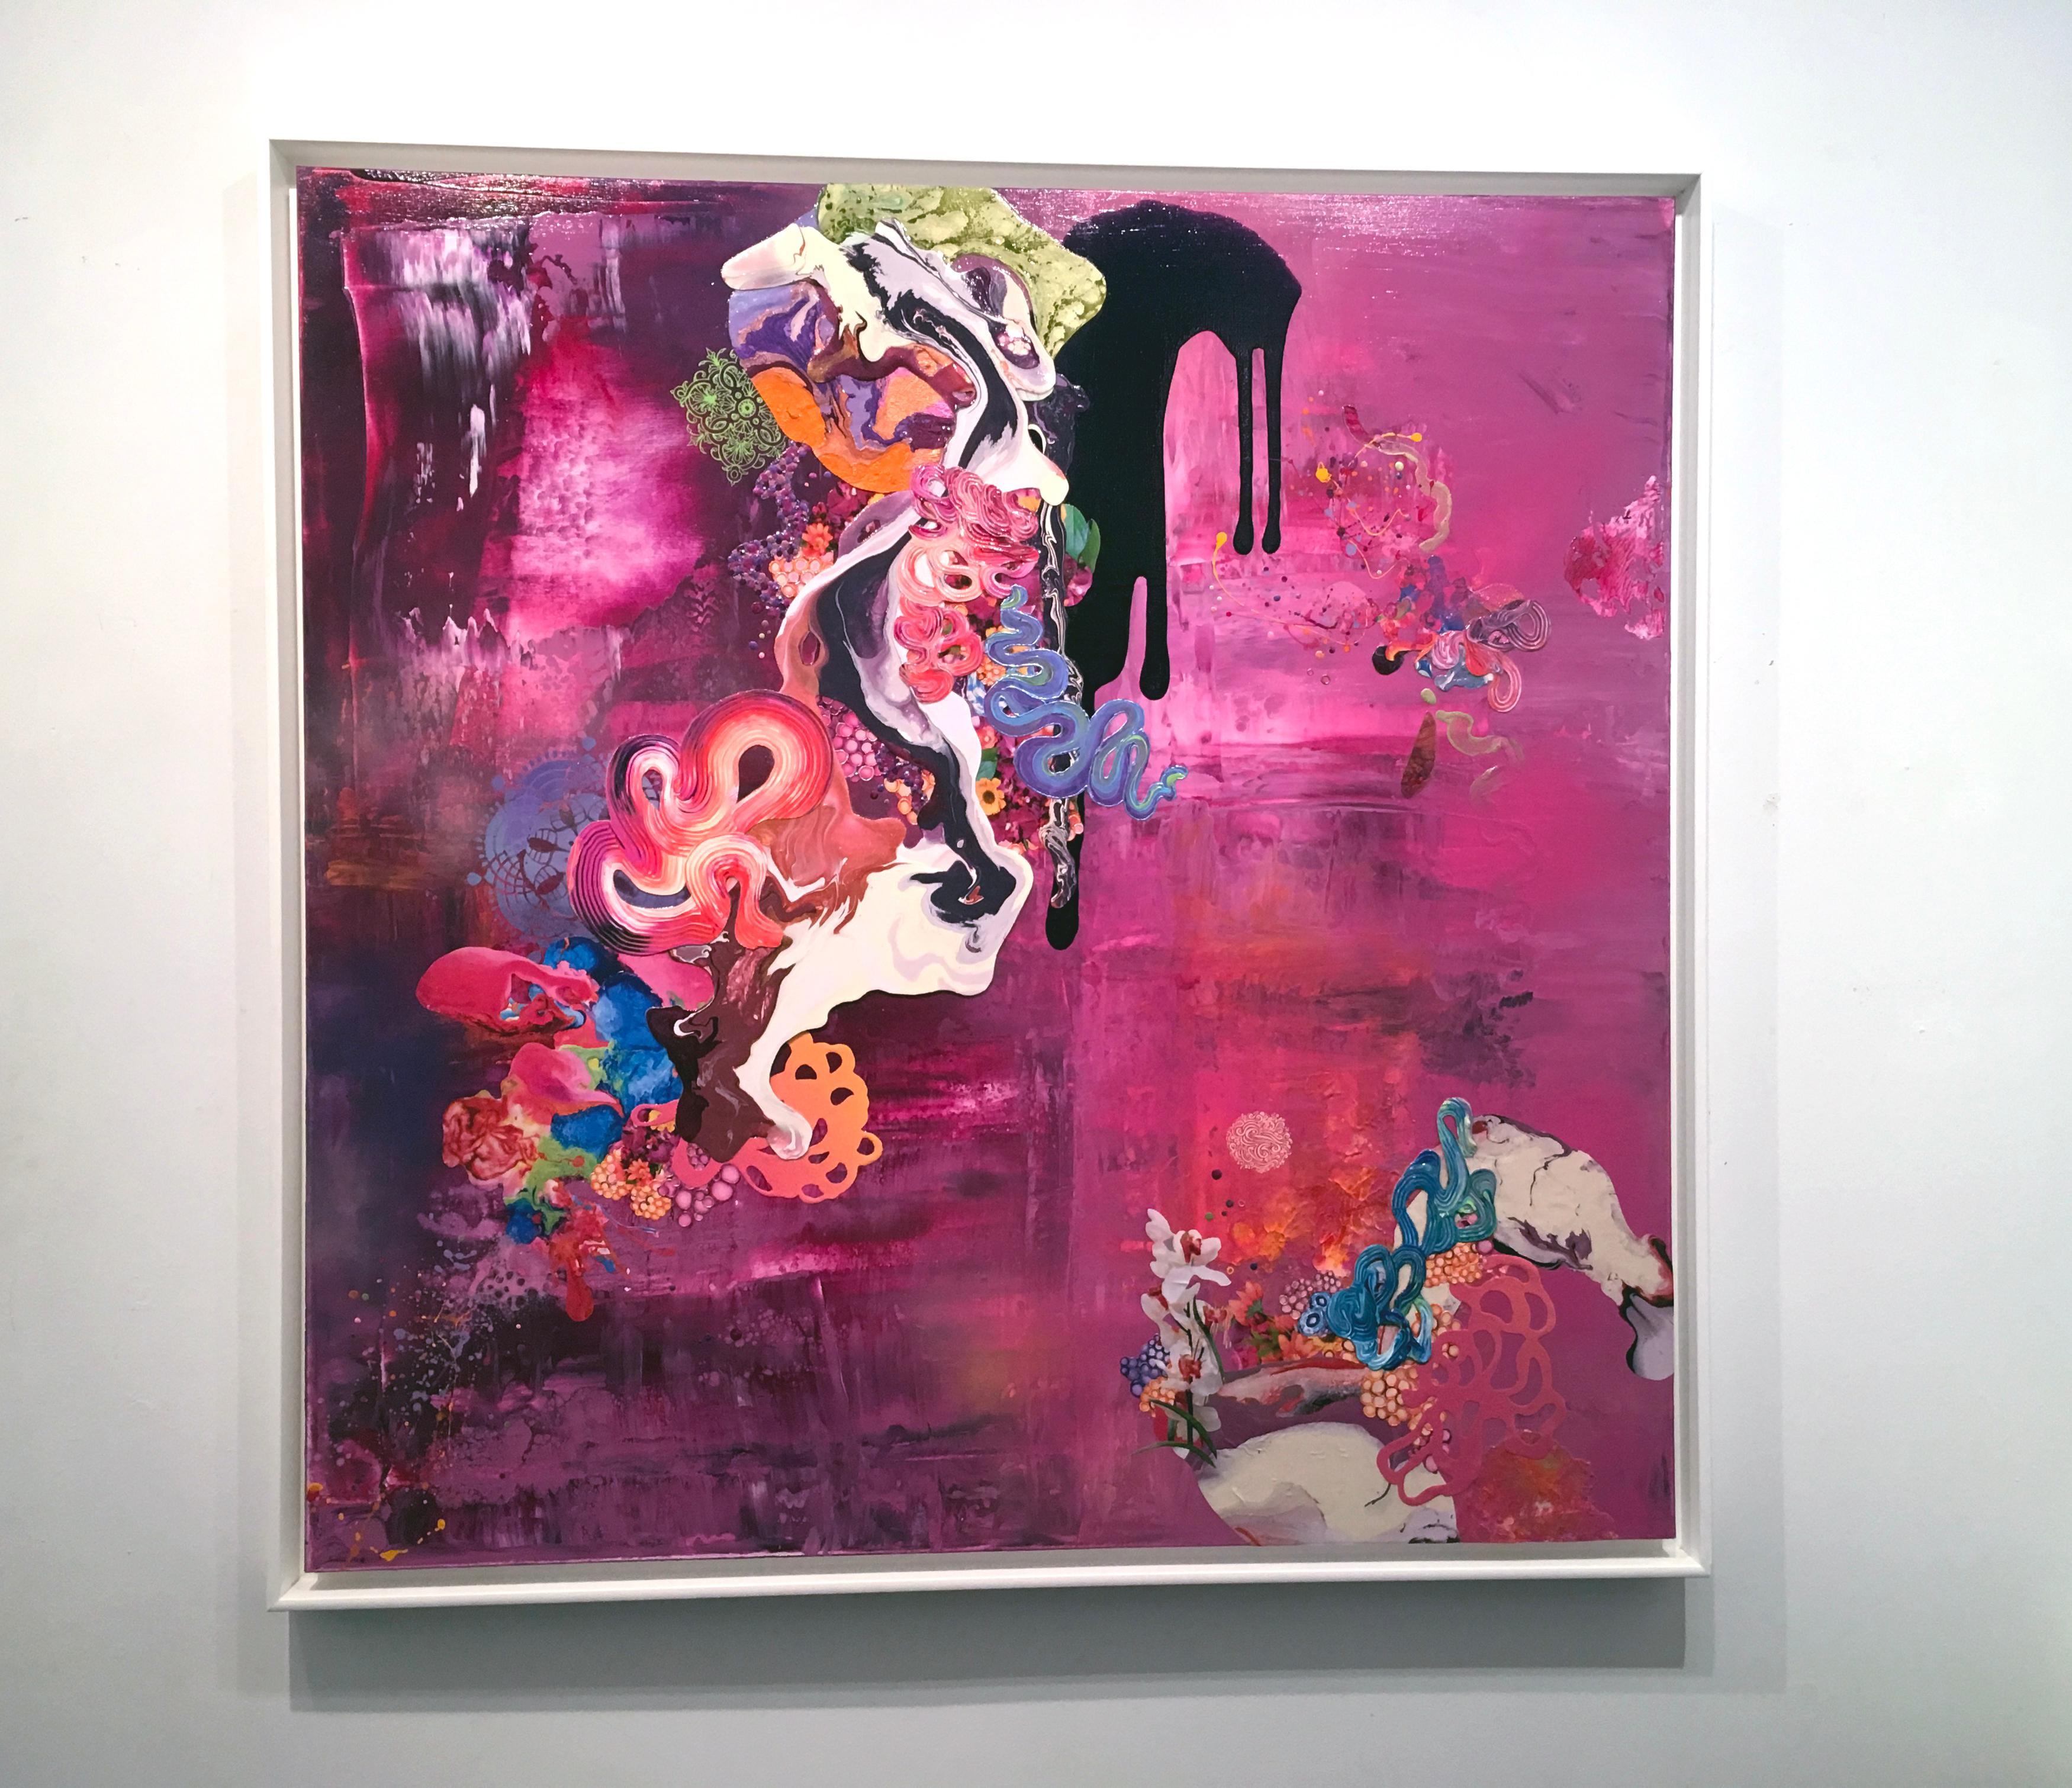 Kimber Berry, Thank You for the Magic Carpet Ride, Acrylic and Mixed Media on Canvas, 48x48.   It is framed with a white float frame. This is a richly layered, textured, dimensional contemporary painting.  It is a colorful painting filled with pink,